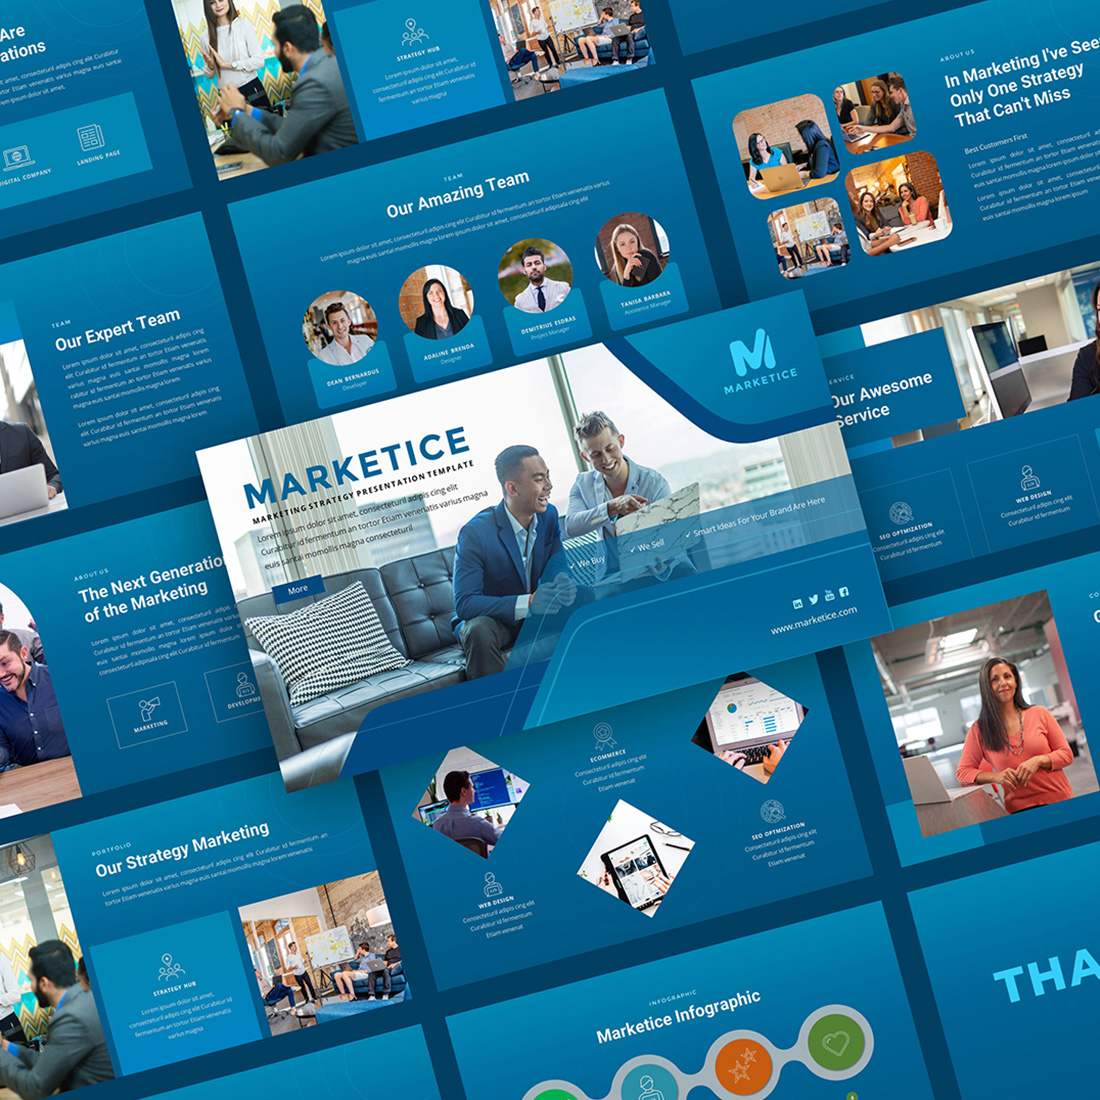 Marketing Presentation PowerPoint Blue Template cover image.